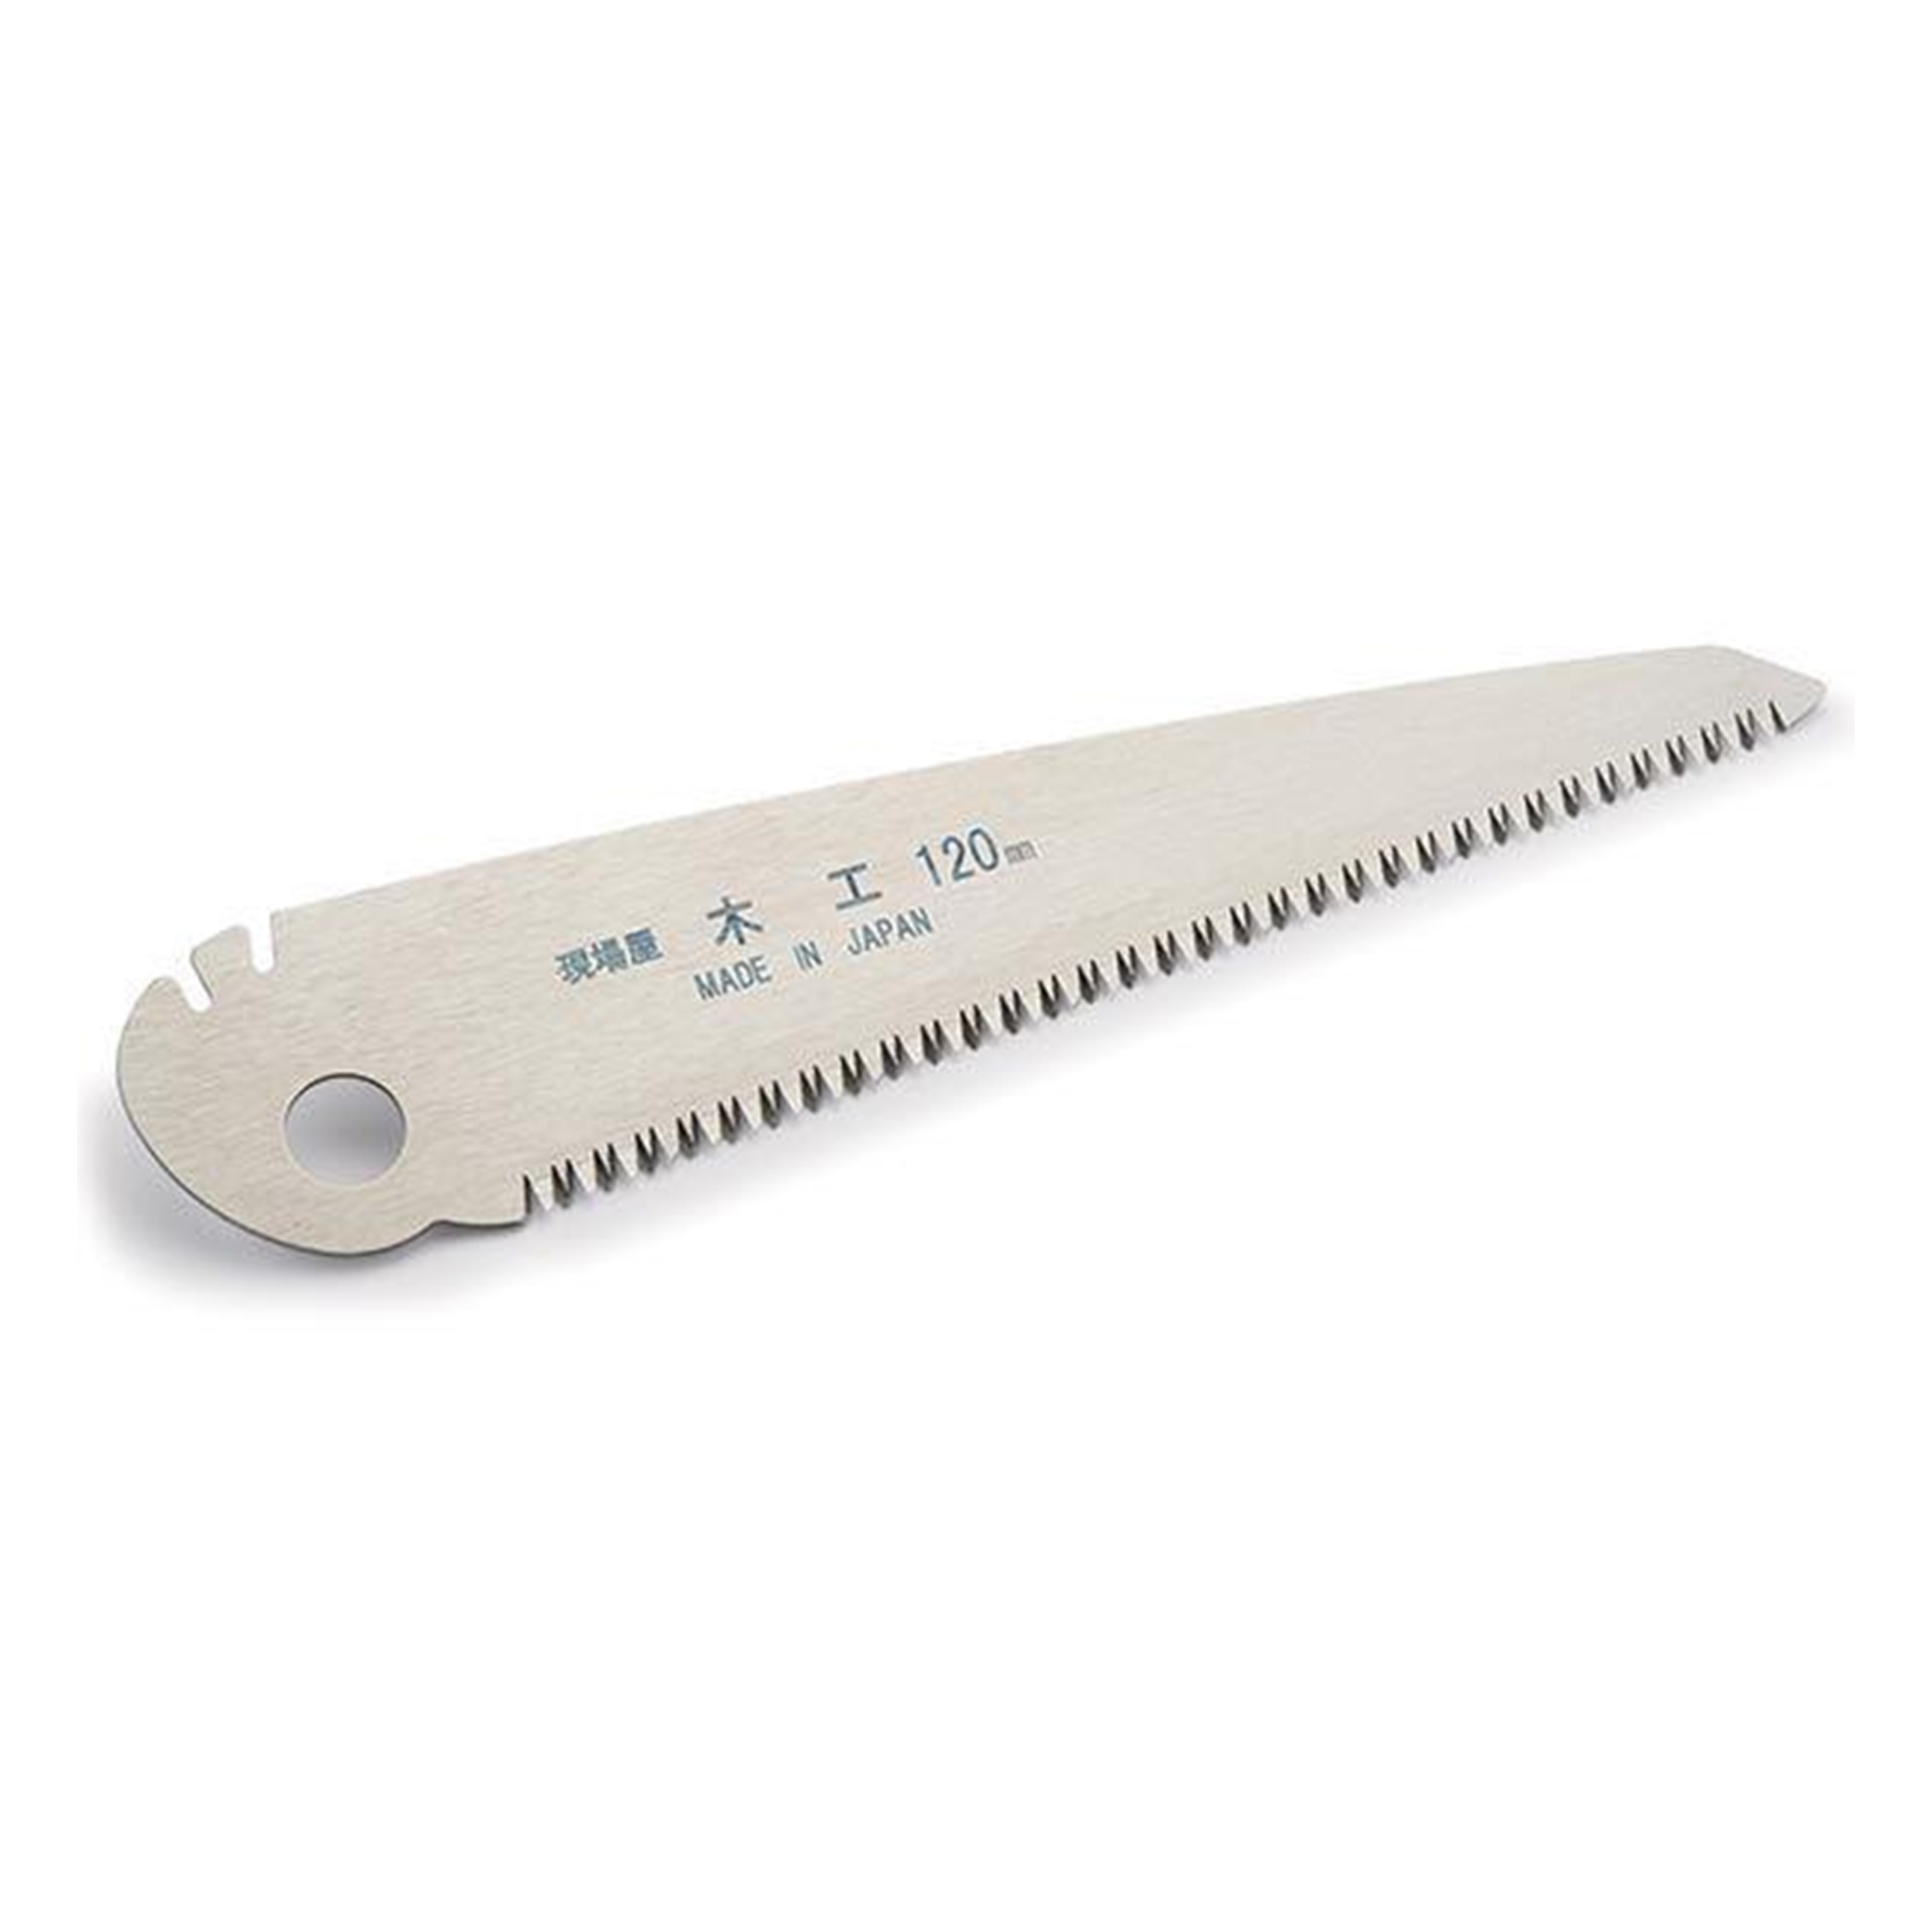 Folding Blade Woodworking Saw No. 0571 Replacement Blade